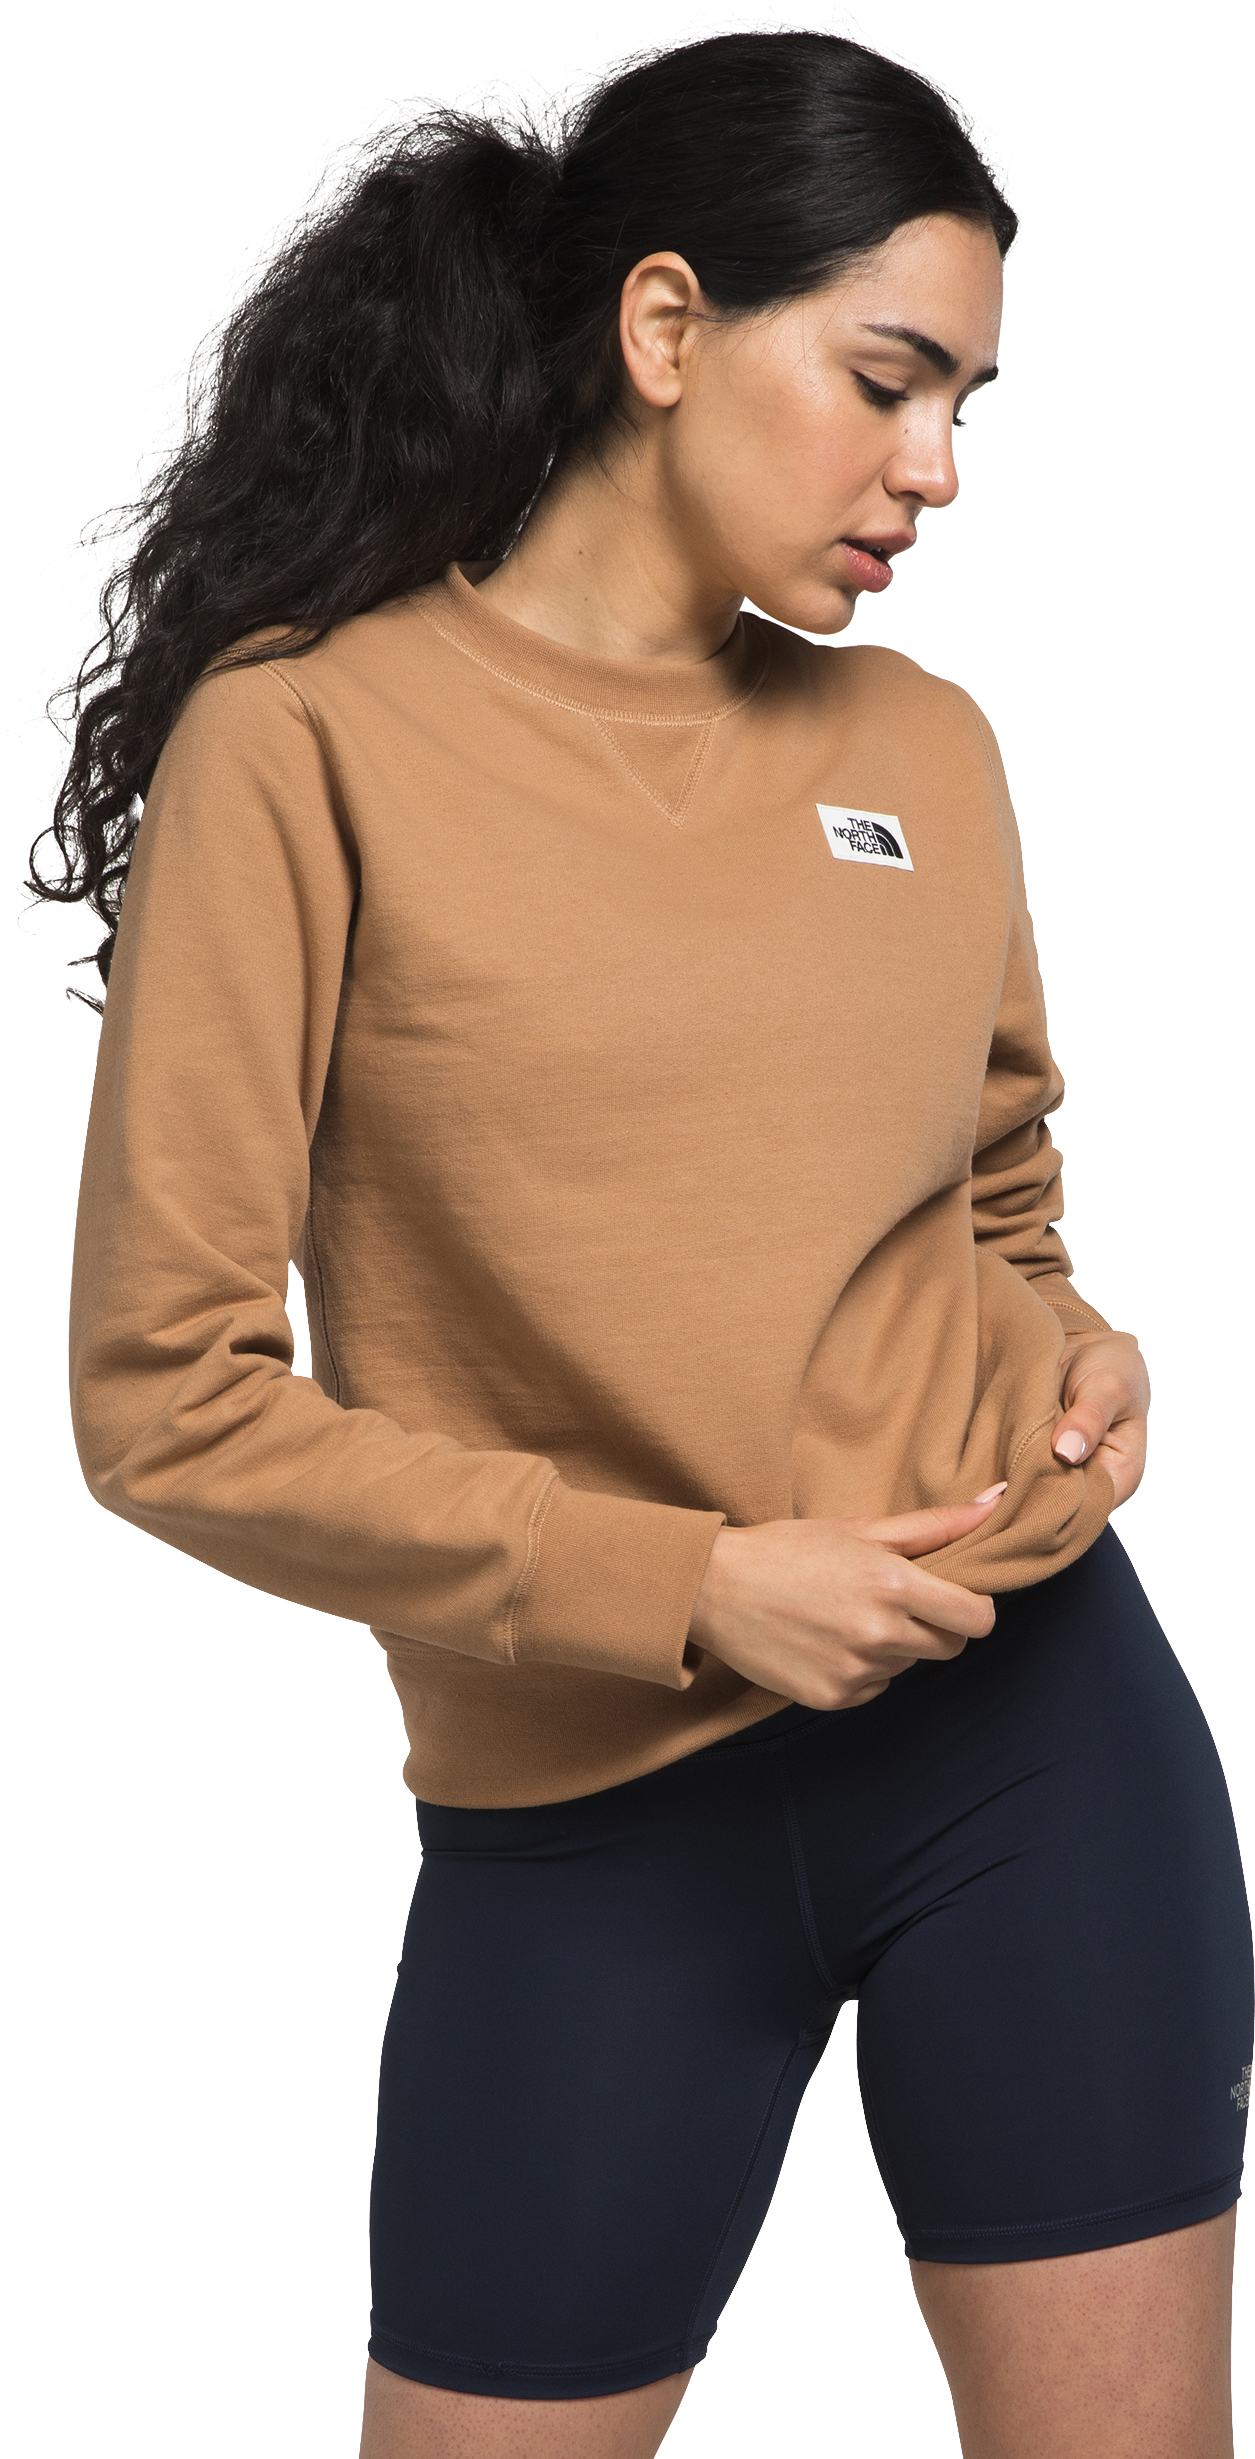 The North Face Heritage Crew - Women's